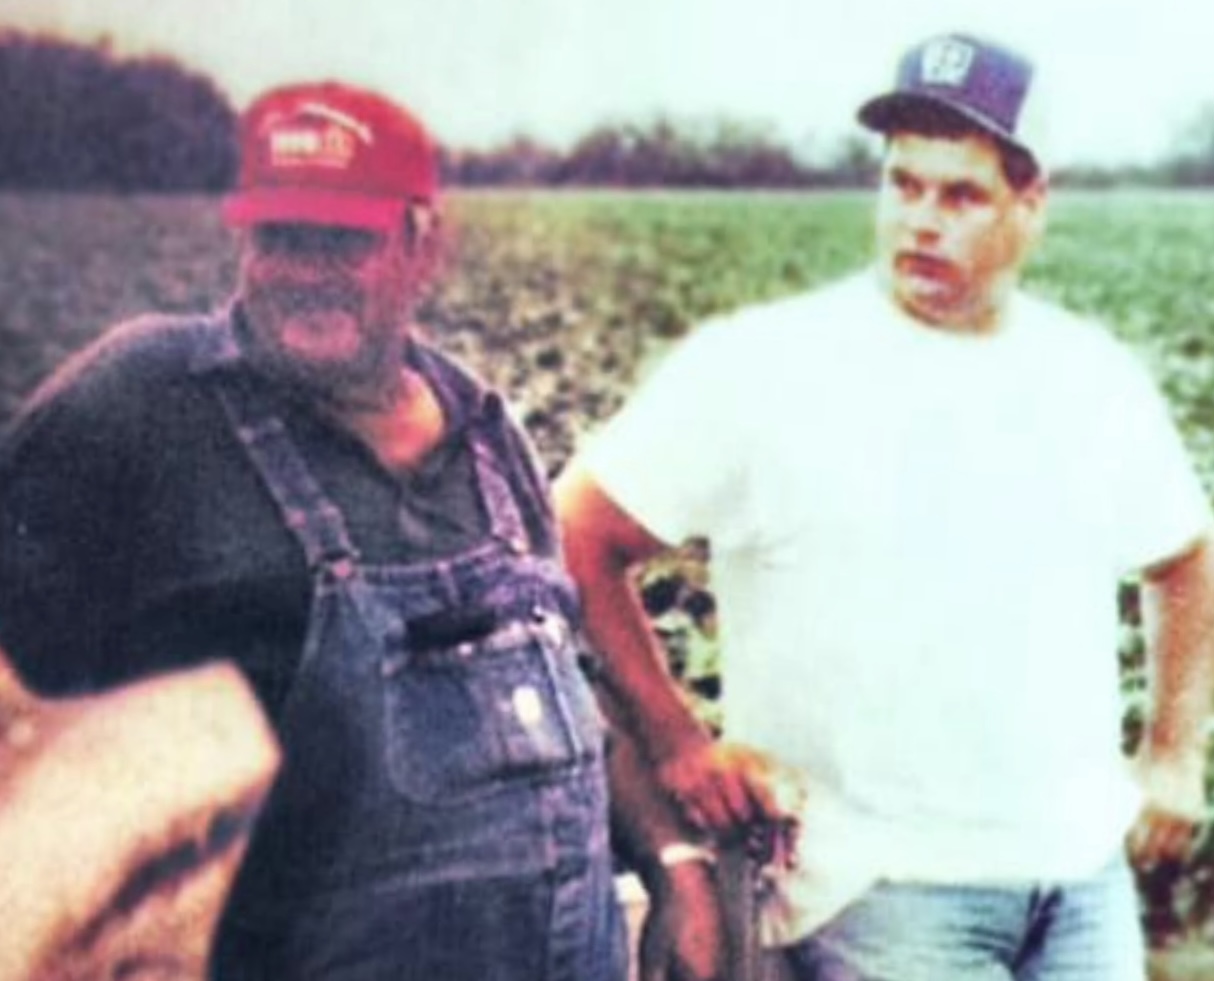 FARMING FATHER AND SON, CHARLES AND MATT MILES